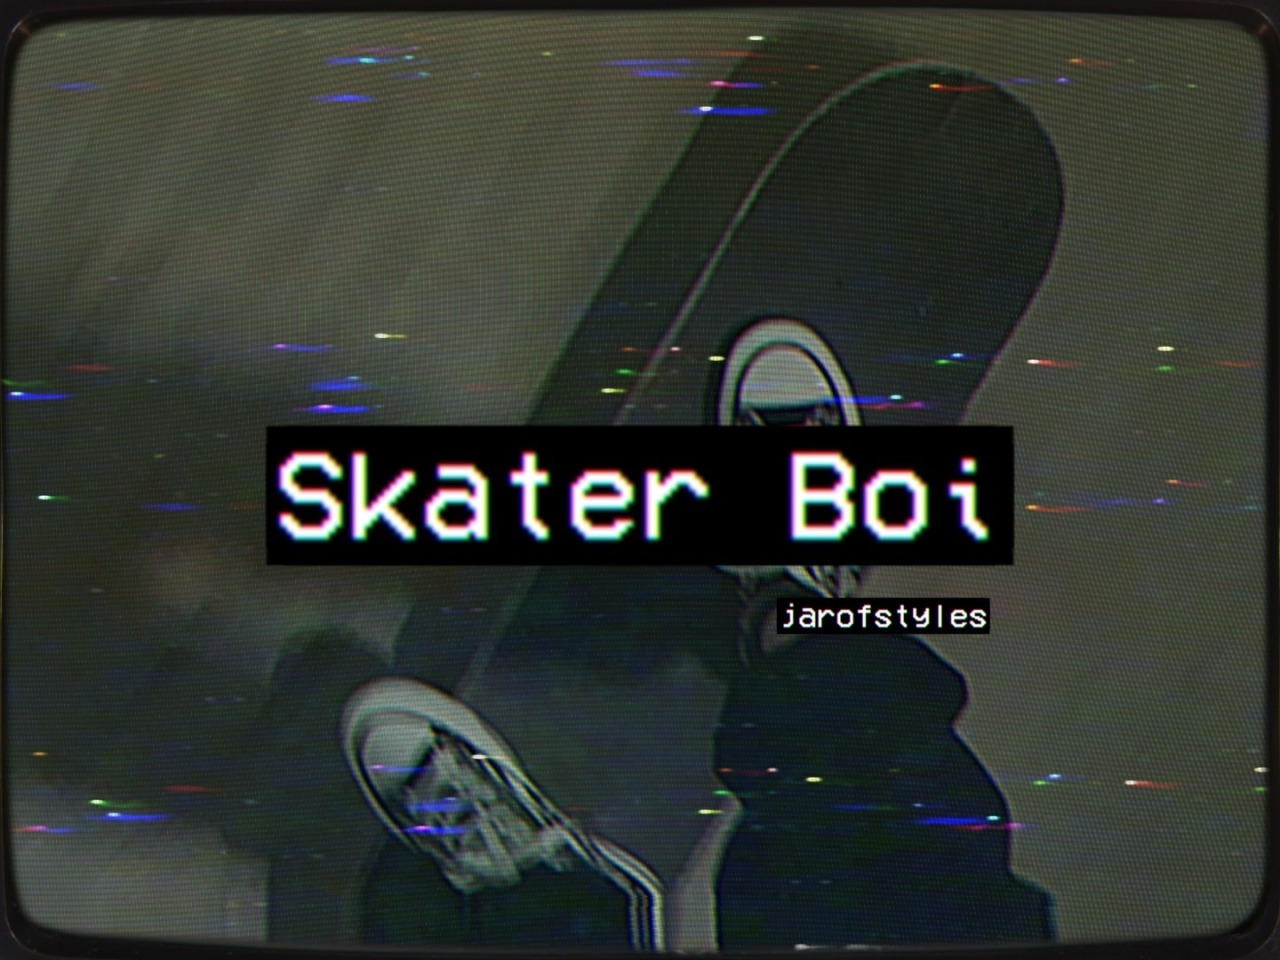 Does anyone know what this is from? I know it's the skater guy pfp